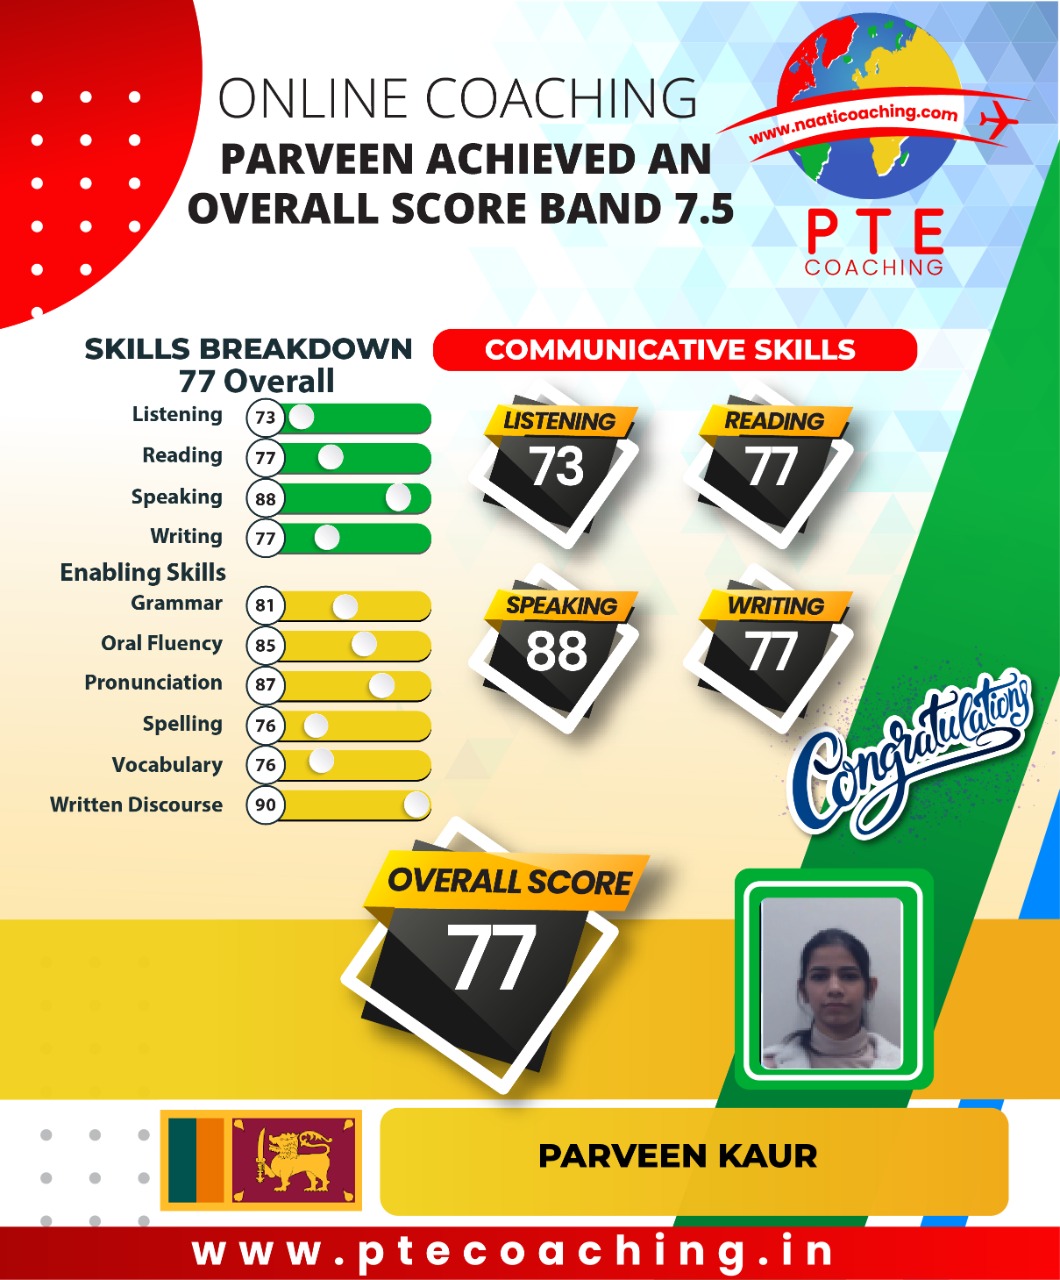 PTE Coaching Scorecard - Parveen achieved an overall score band 7.5